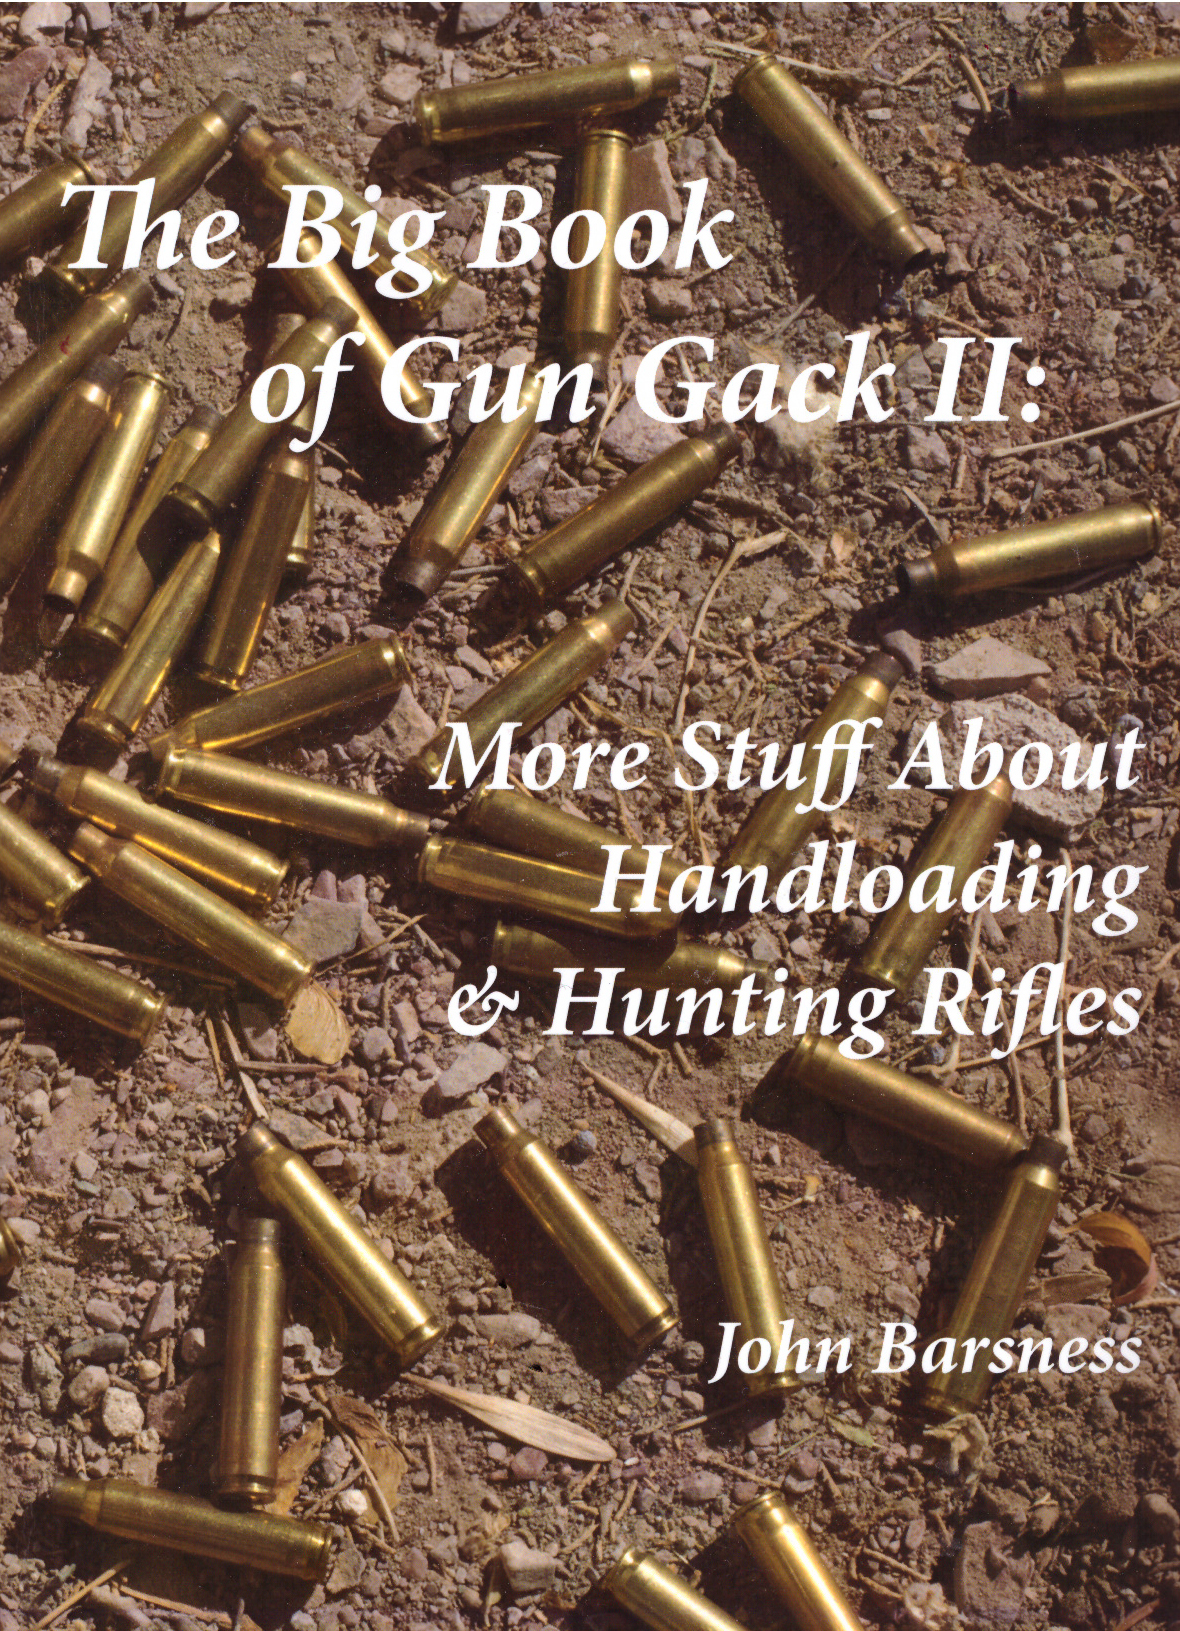 A Text Book for Rifle Loonies